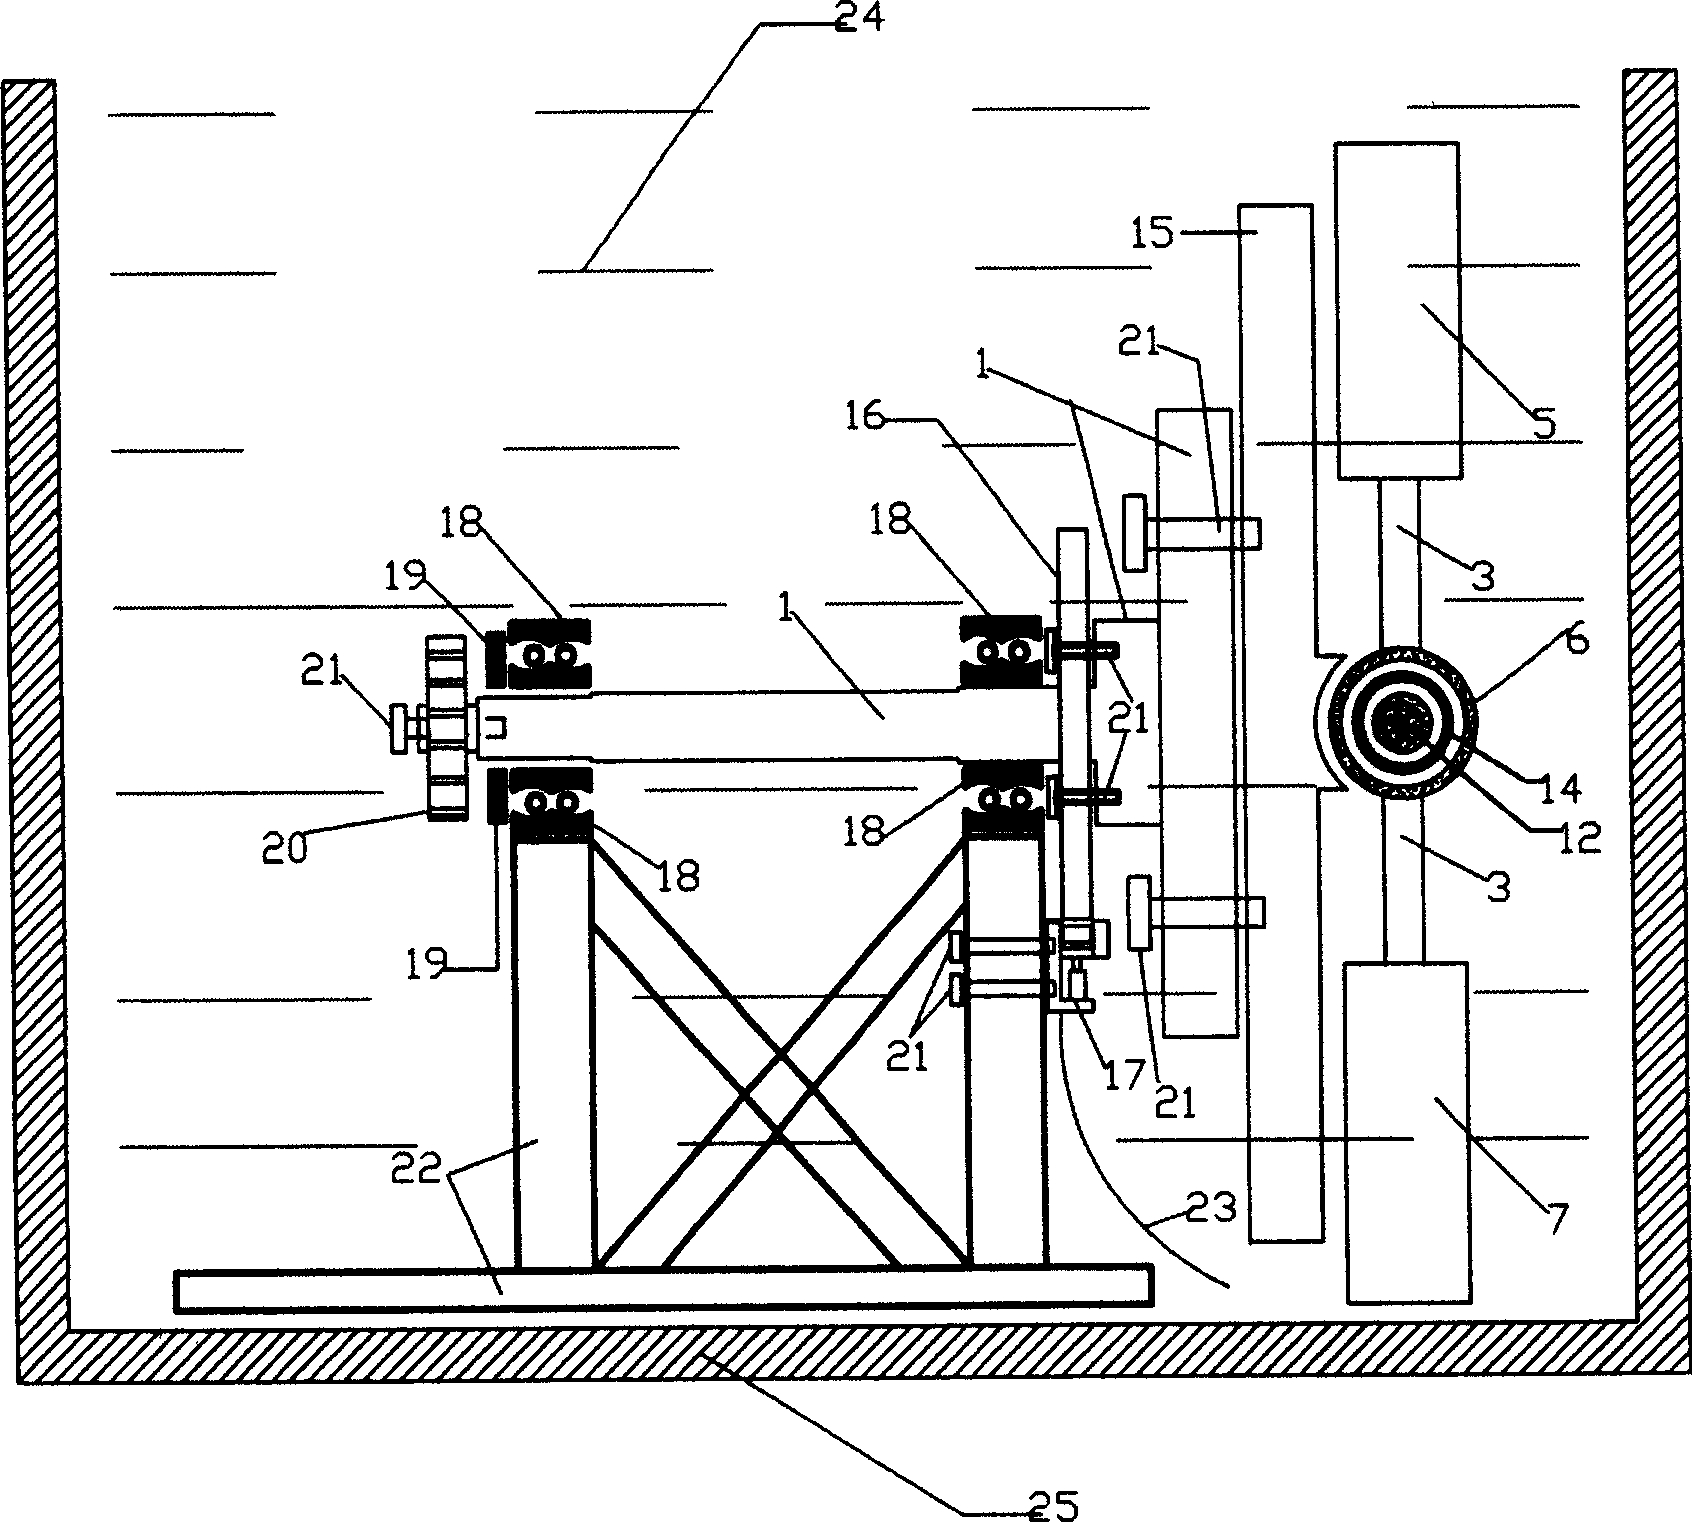 Output machine for converting buoyancy into rotating force